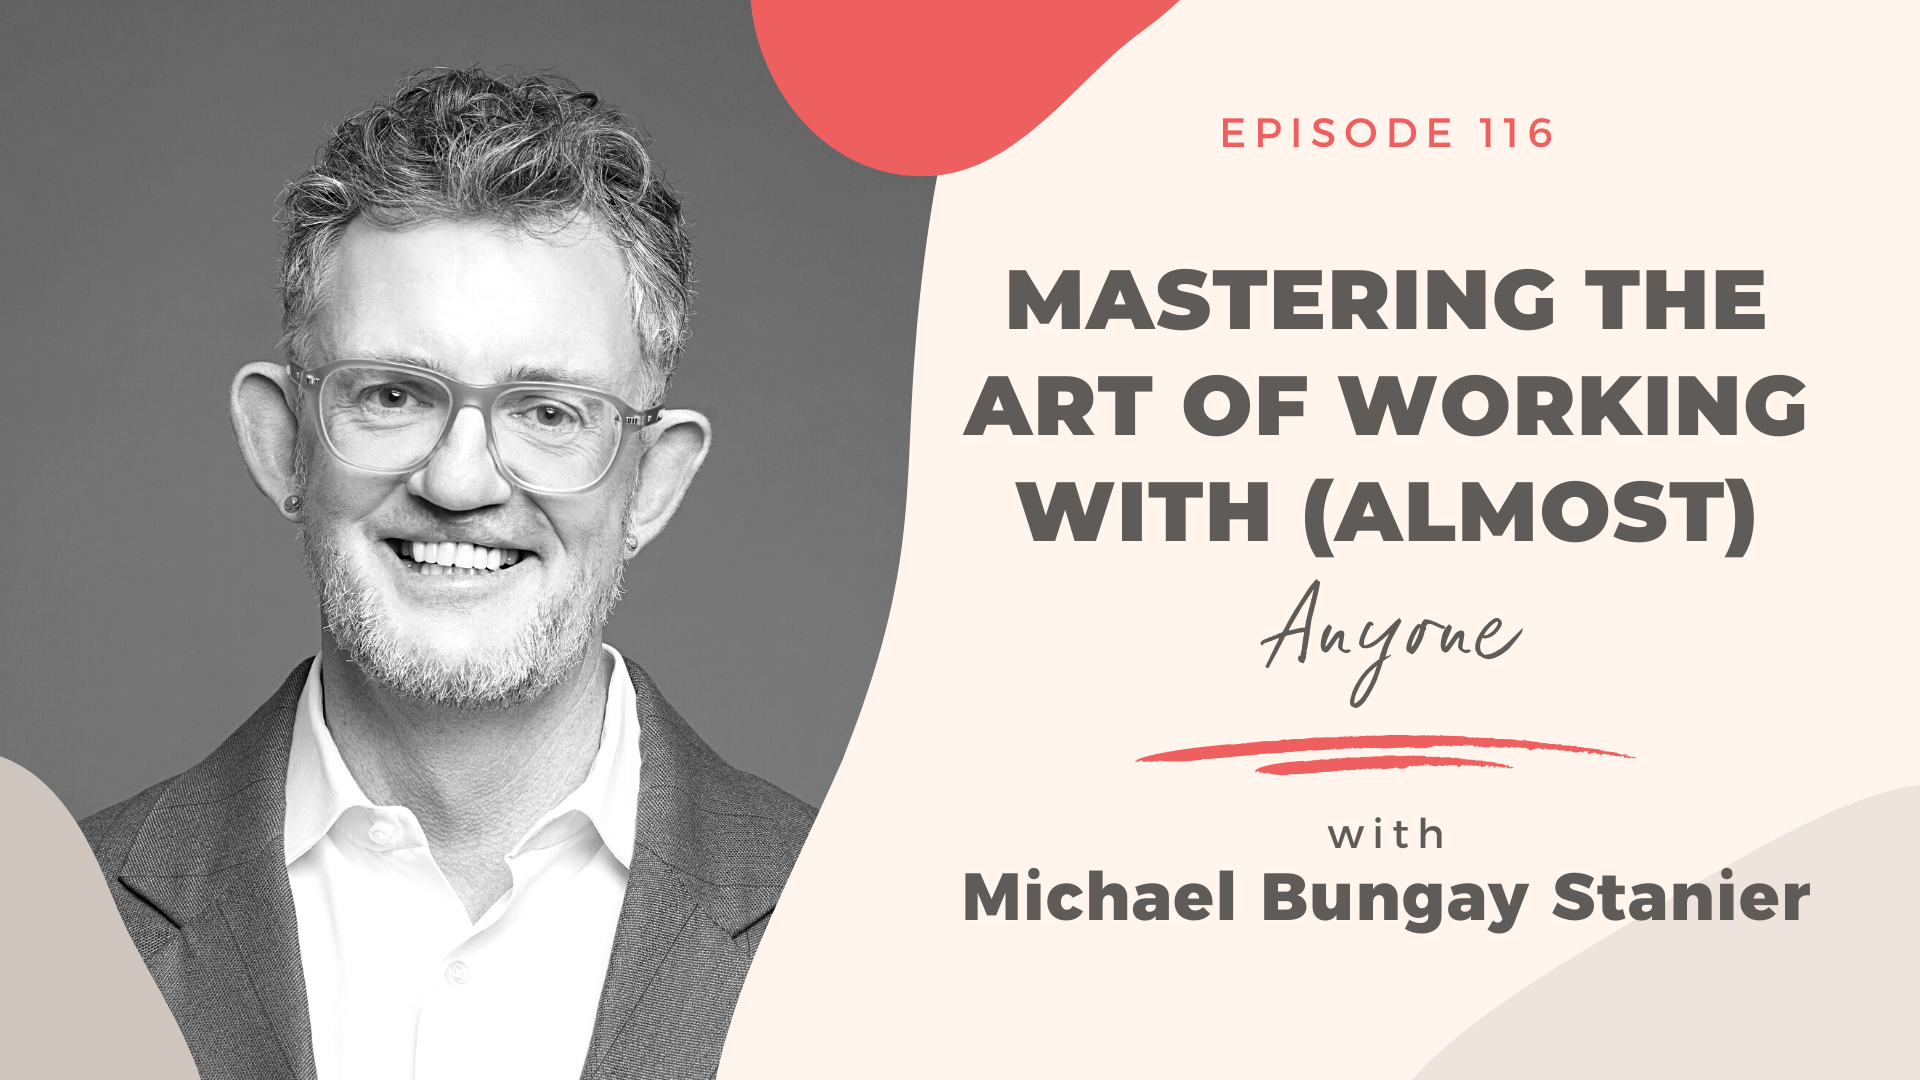 Michael Bungay Stanier at the CultureLab Podcast